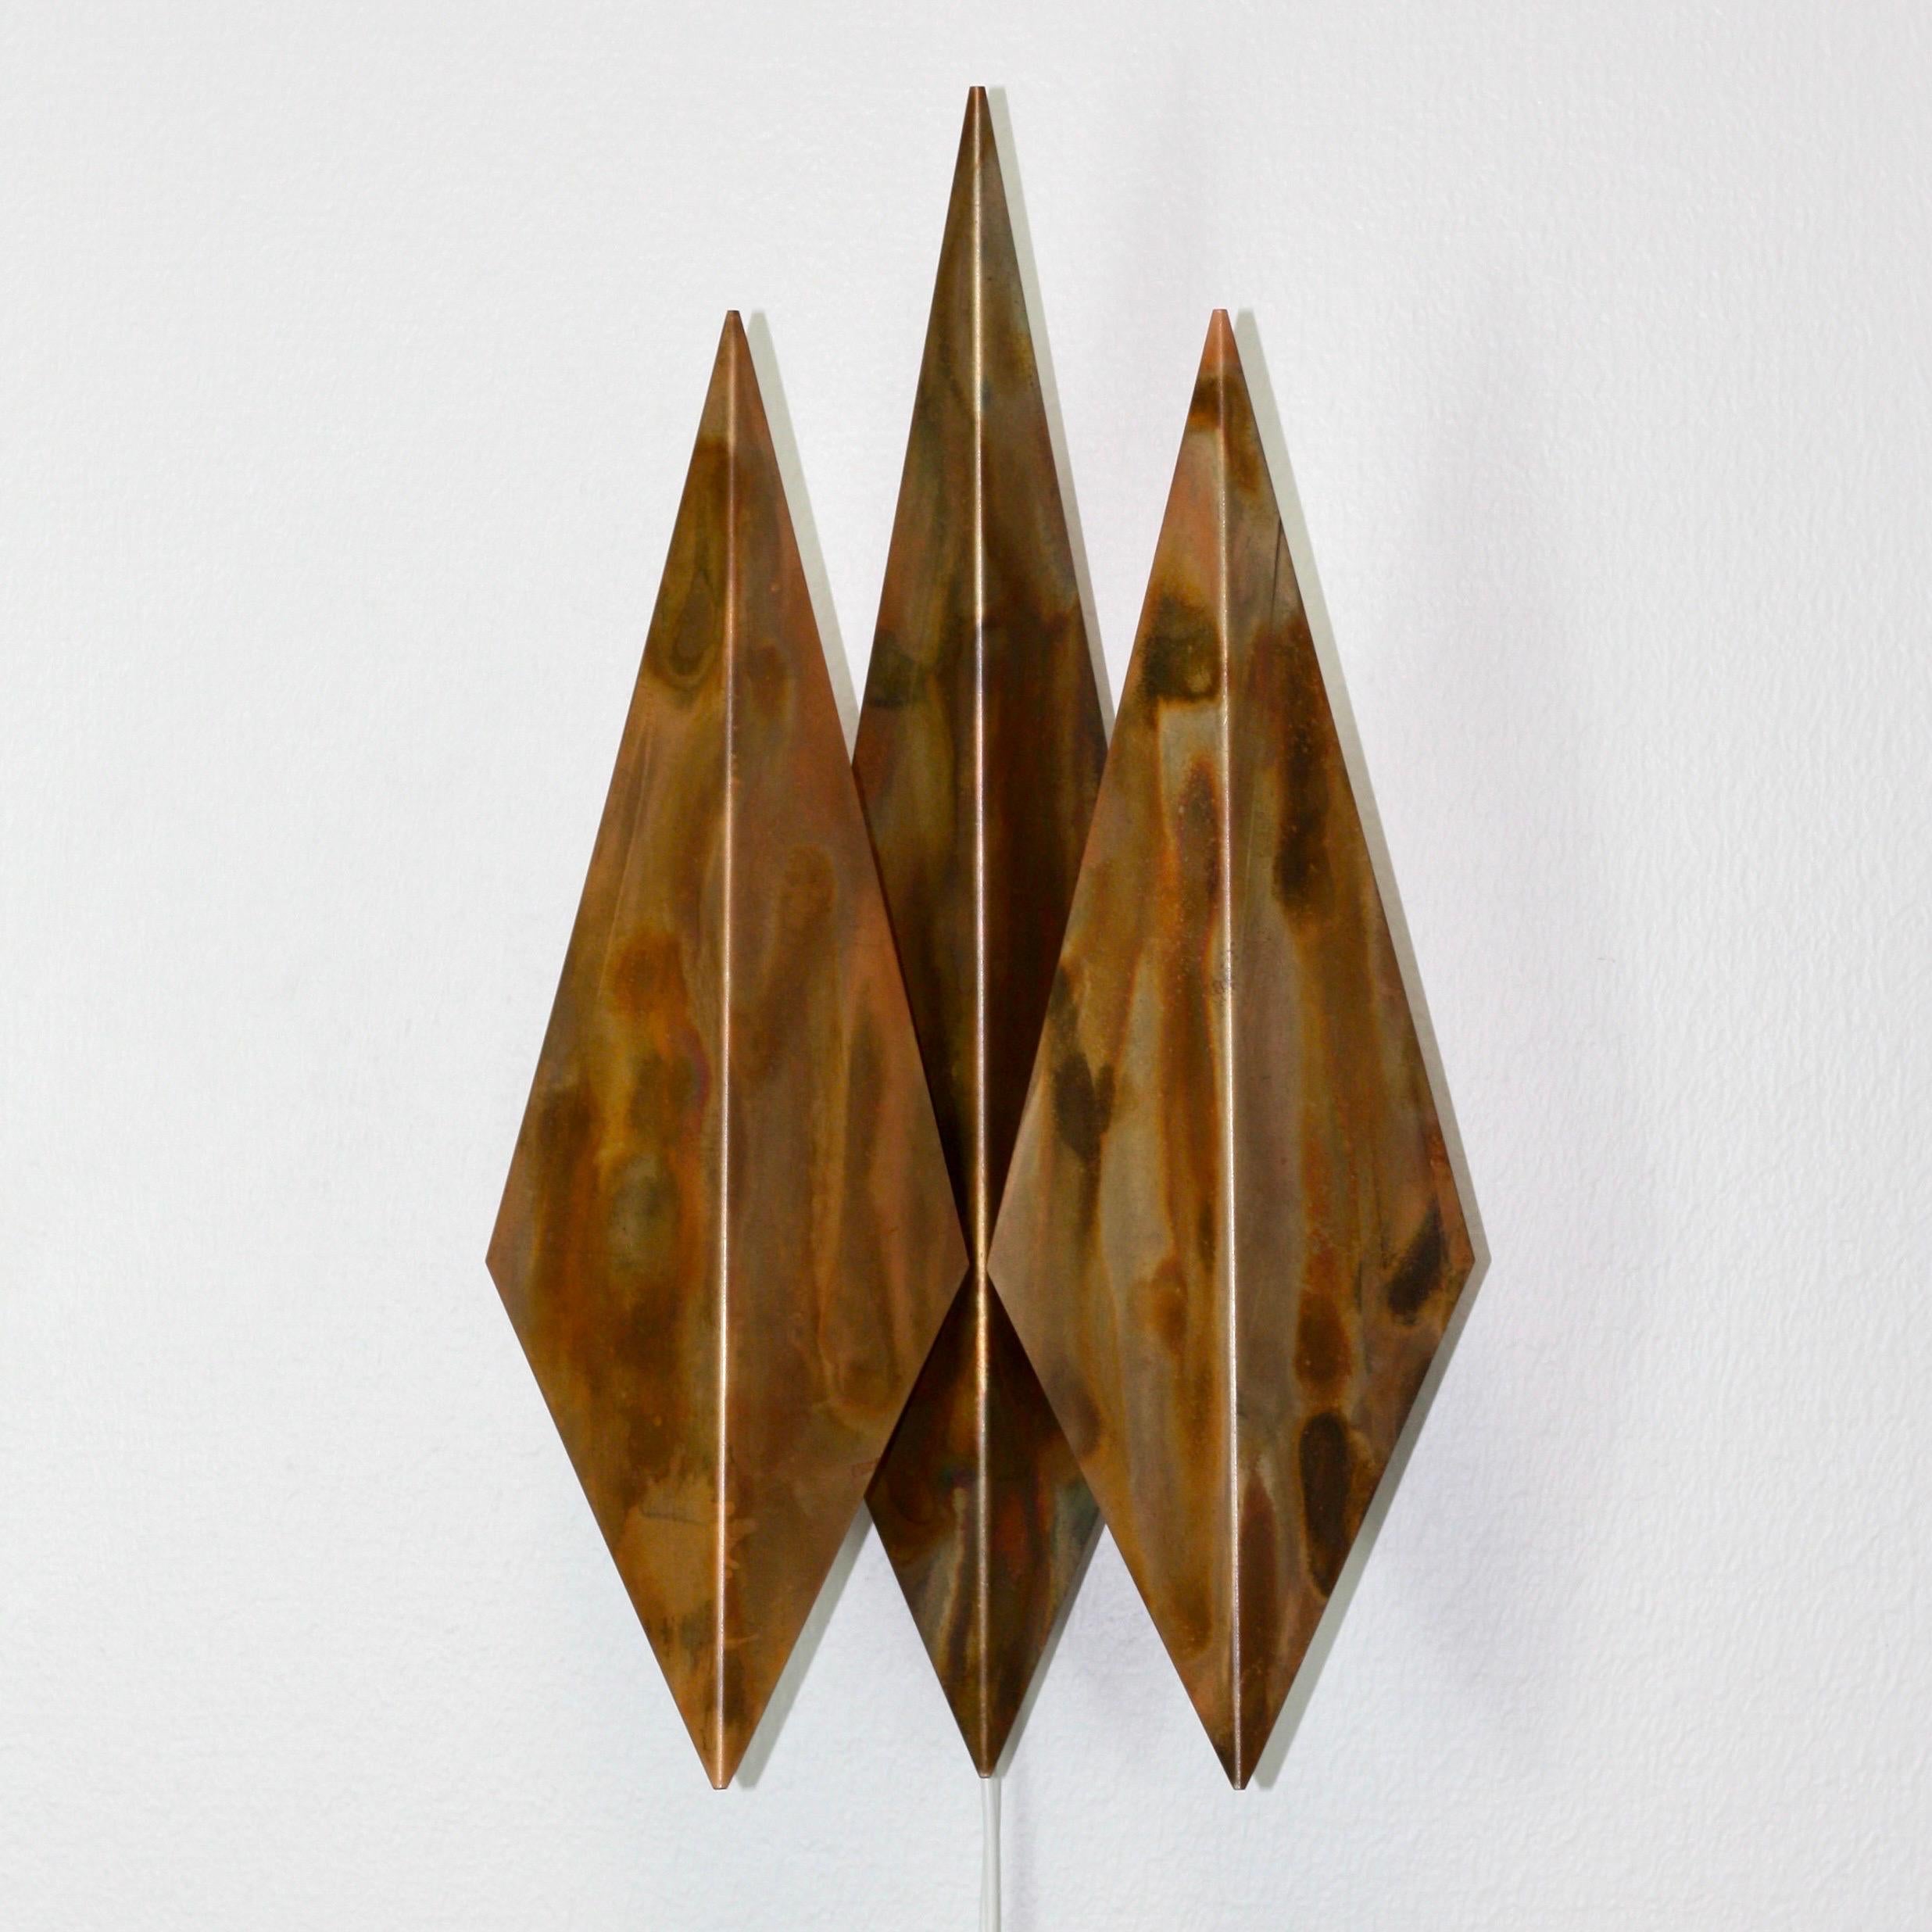 Mid-20th Century Pair of Copper Wall Lamps by Svend Aage Holm Sorensen, 1960s, Denmark For Sale